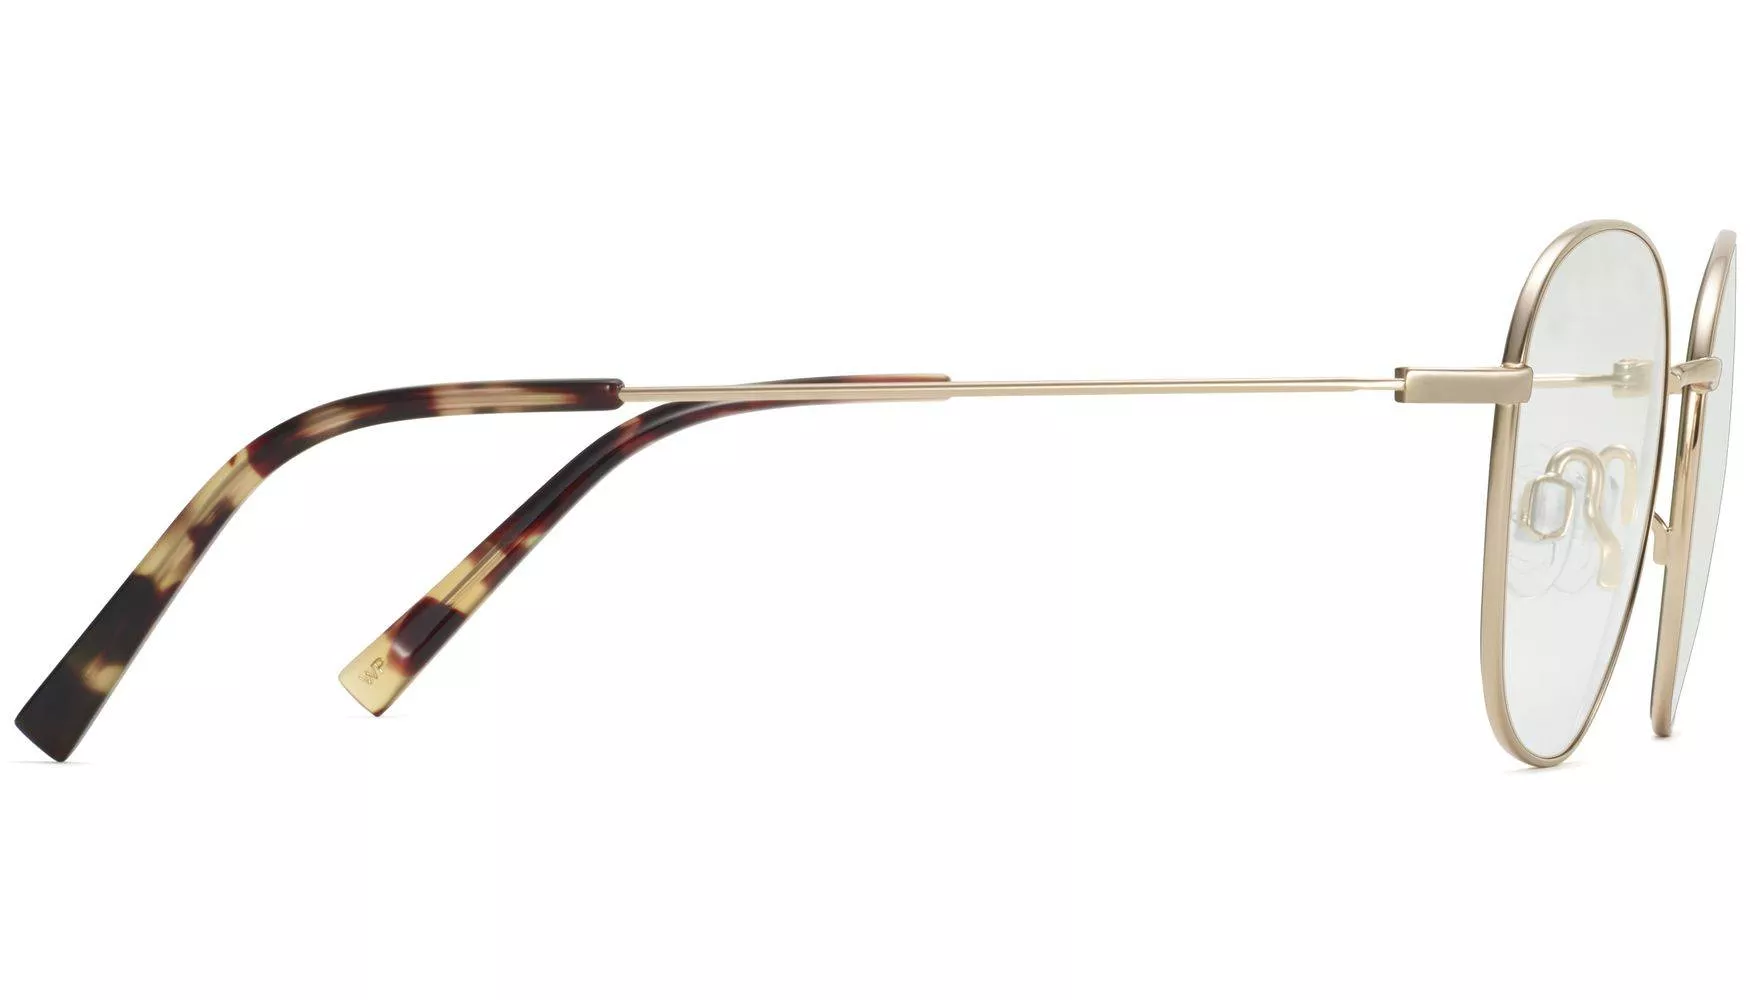 Side View Image of Cyrus Eyeglasses Collection, by Warby Parker Brand, in Polished Gold Color